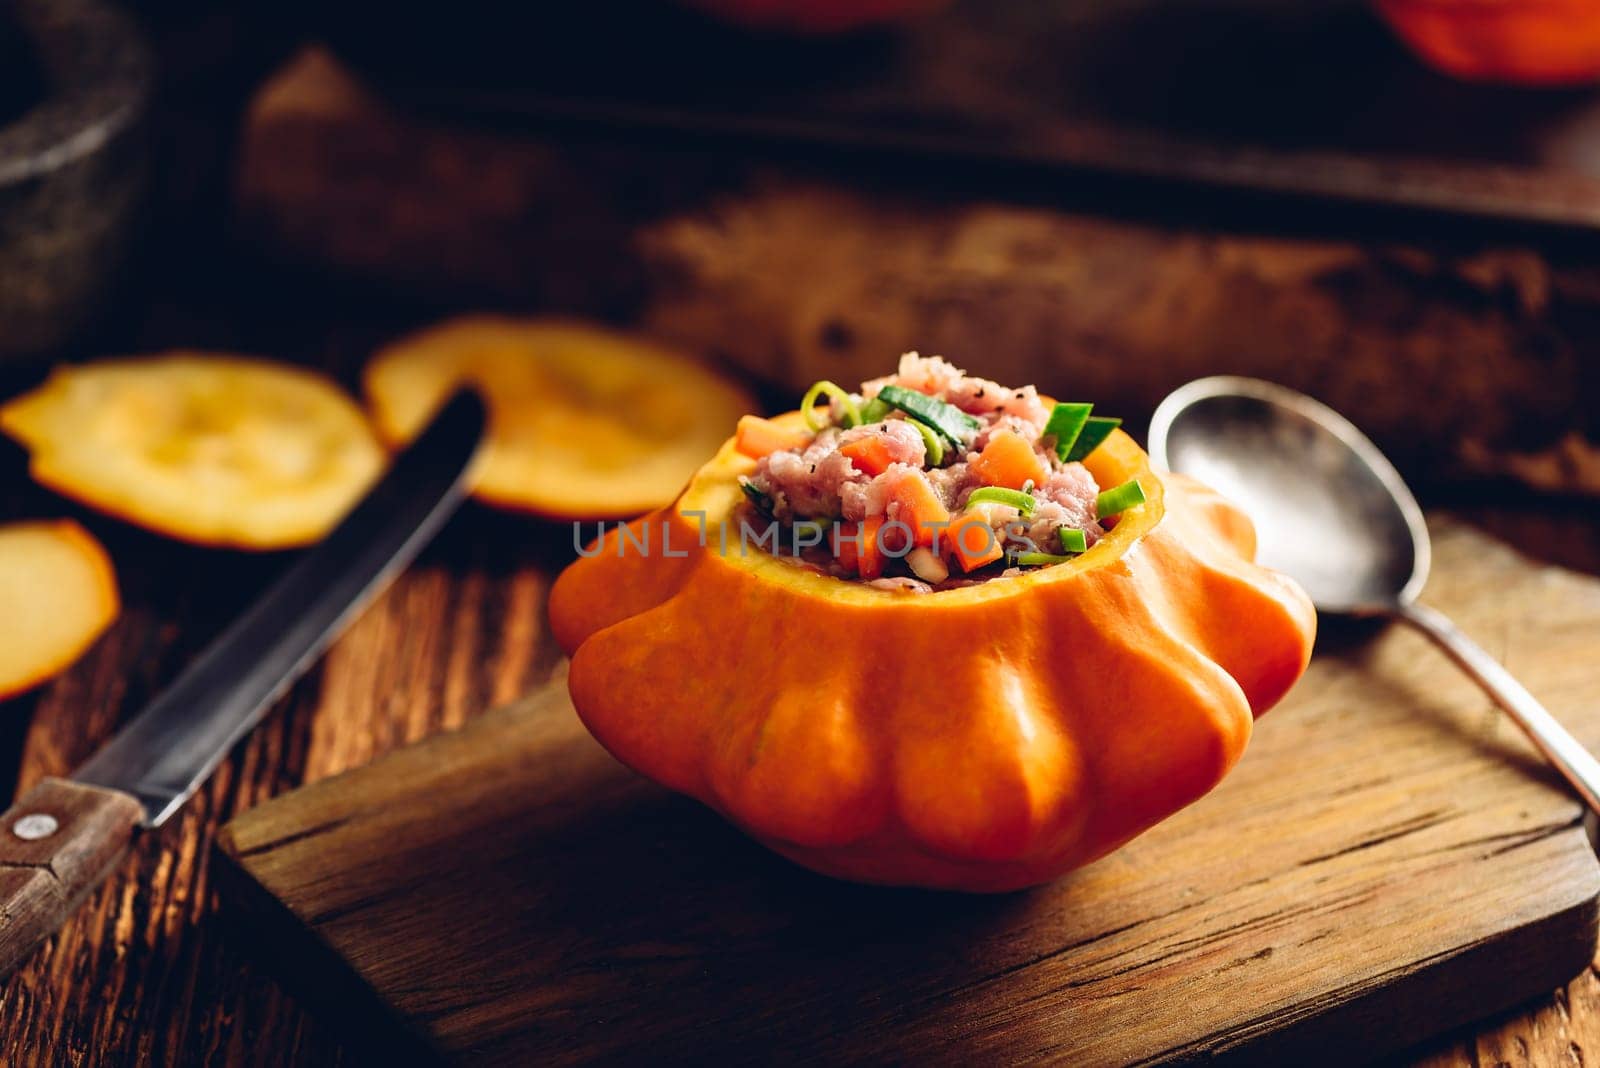 Yellow pattypan squash stuffed with minced meat, carrot and leek on cutting board